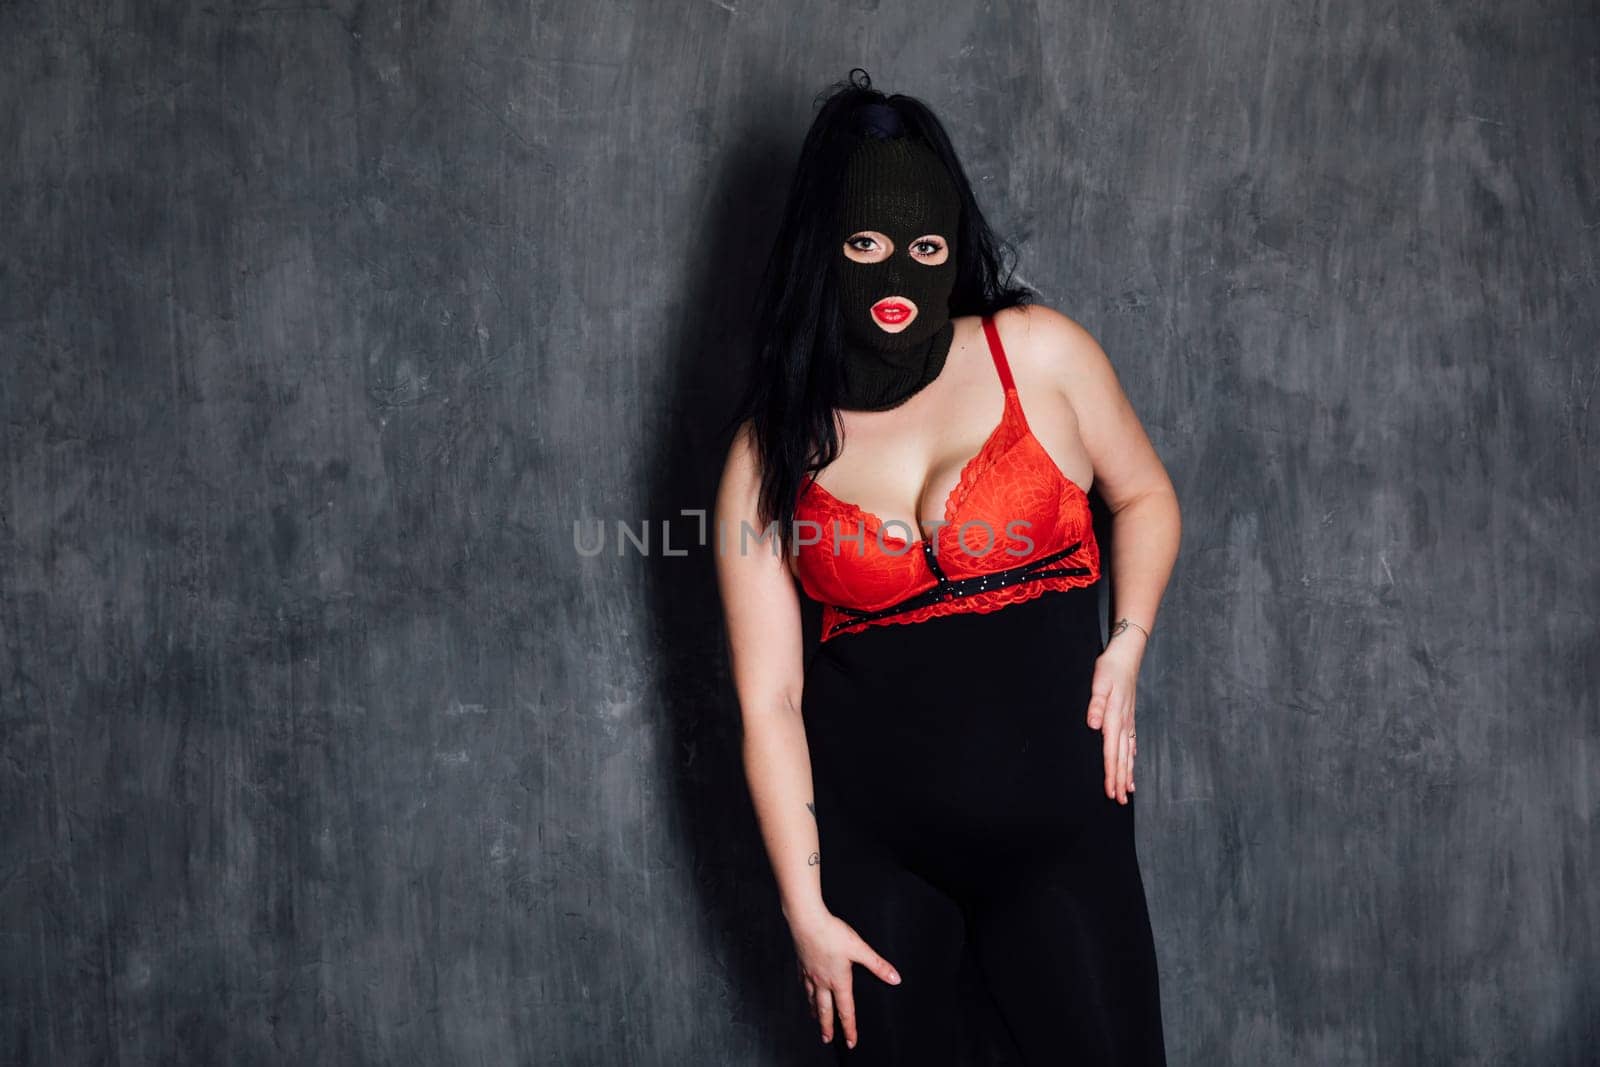 A masked woman in a dark room is a bandit by Simakov